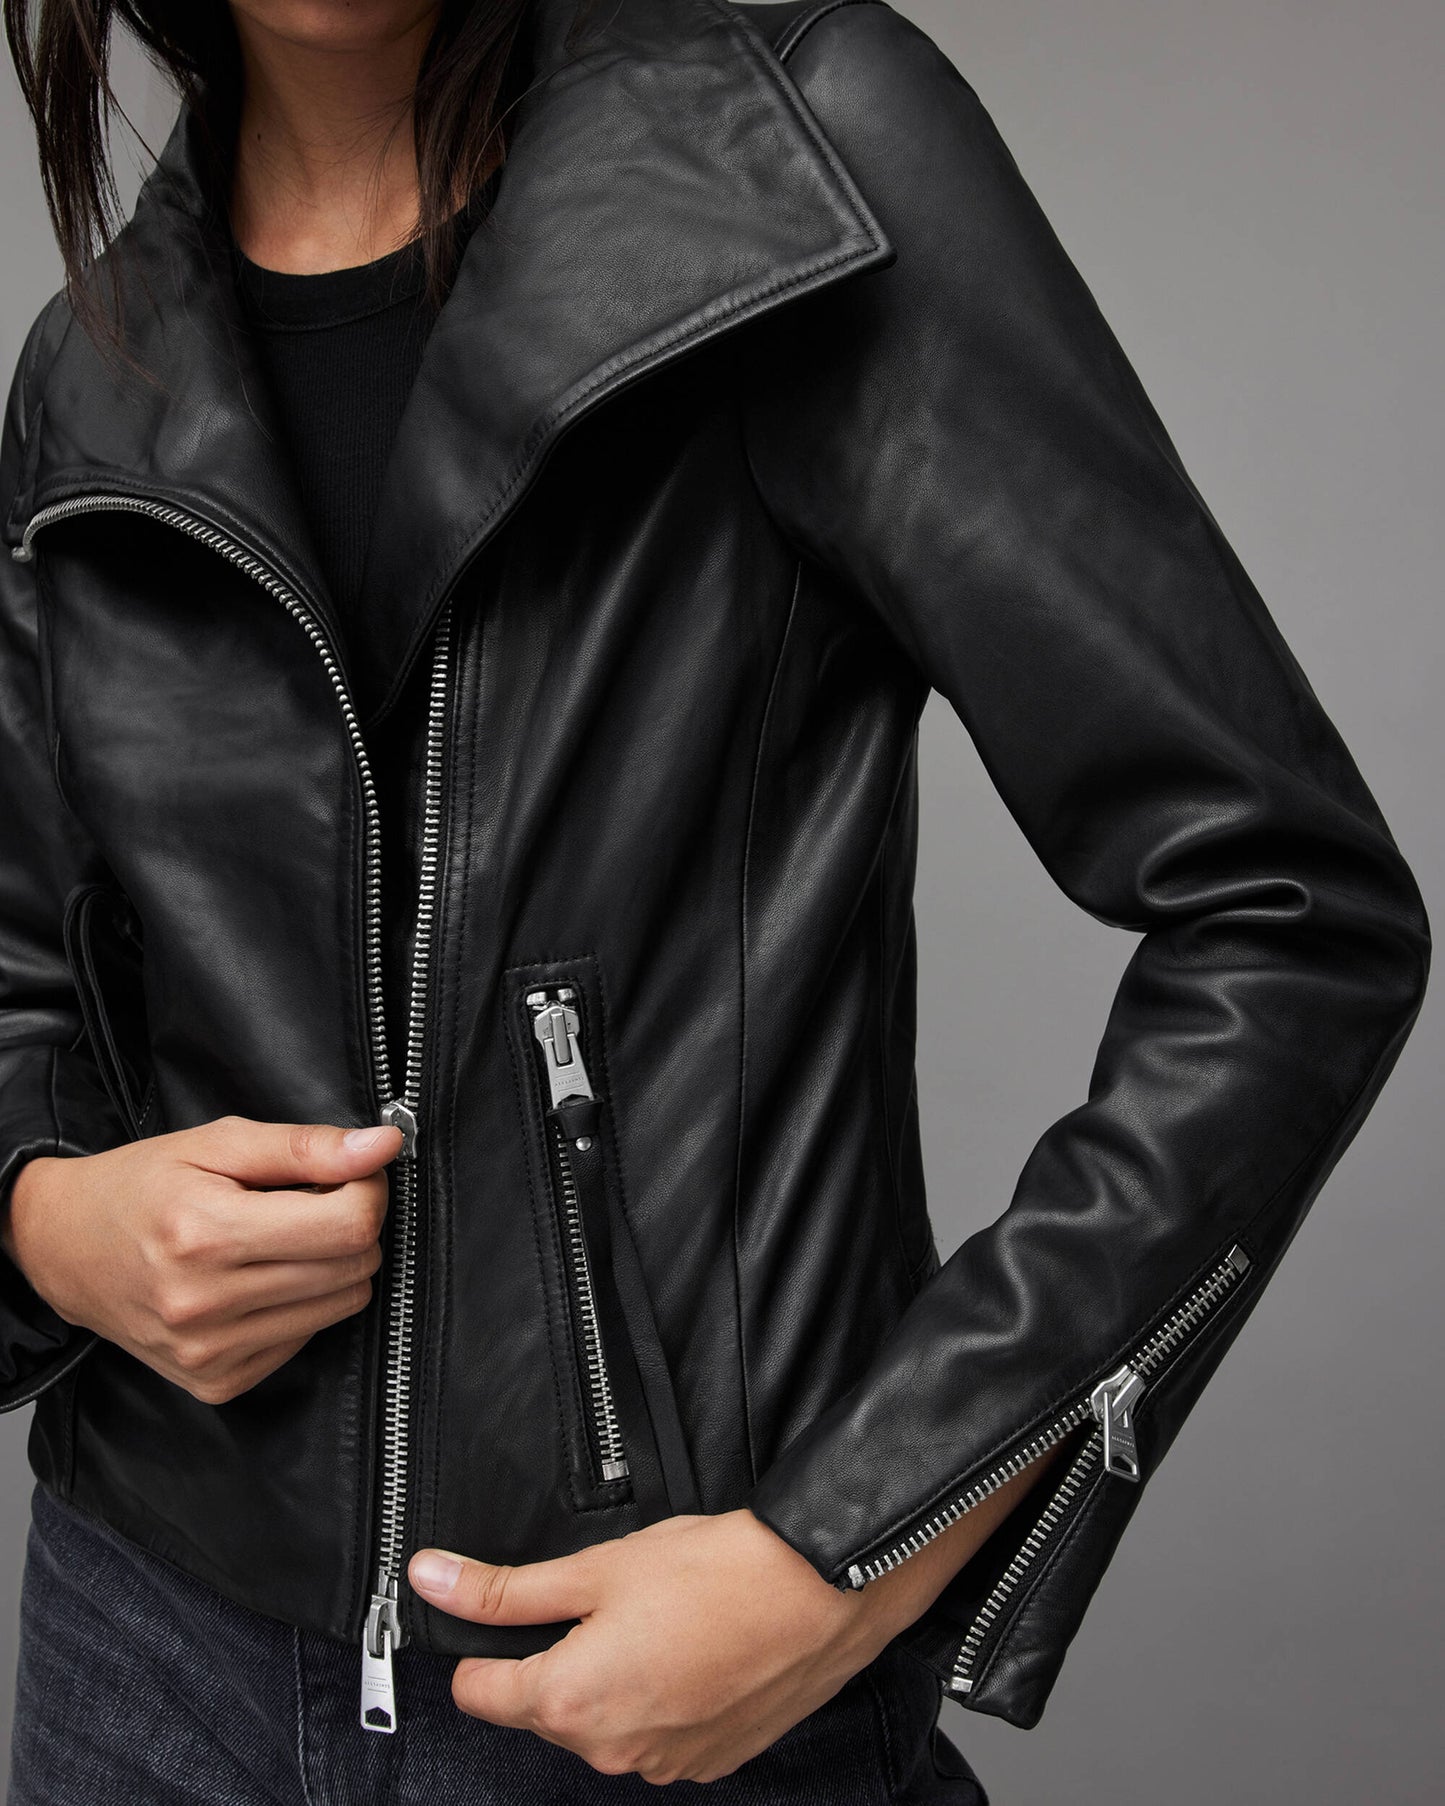 Women's Leather Biker Jacket In Black With Wing Collar